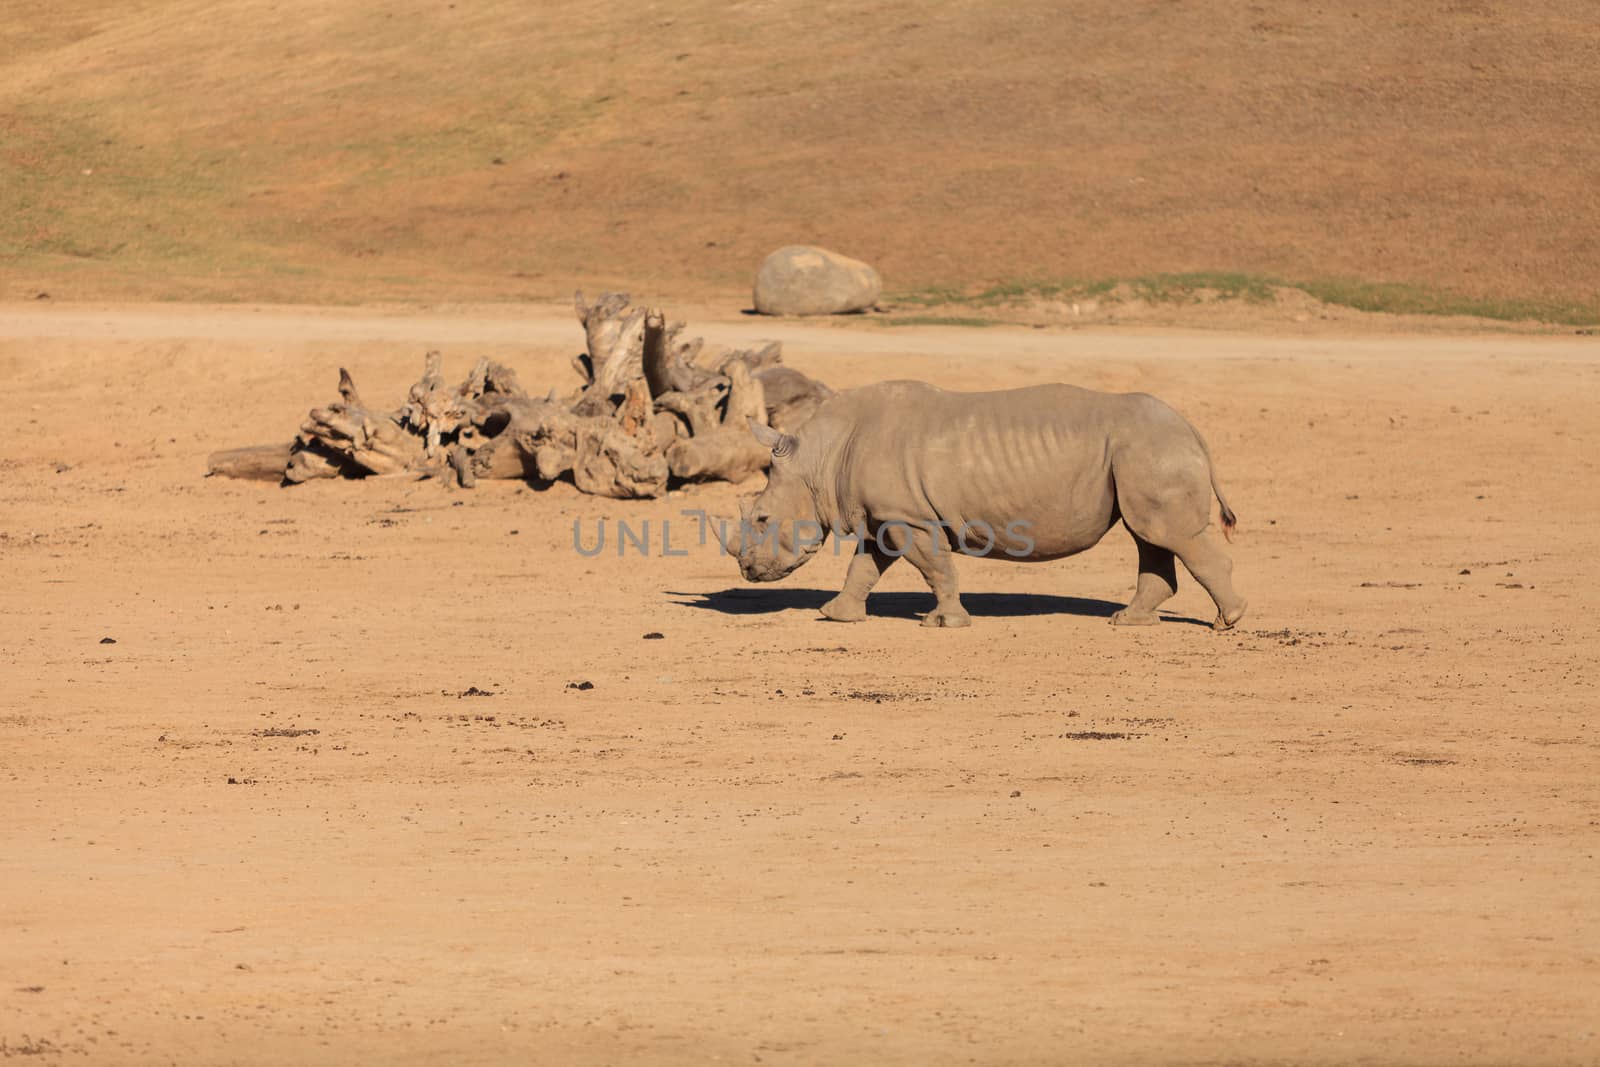 White African rhinoceros, Ceratotherium simum, is found in Africa along the grass planes and is now endangered